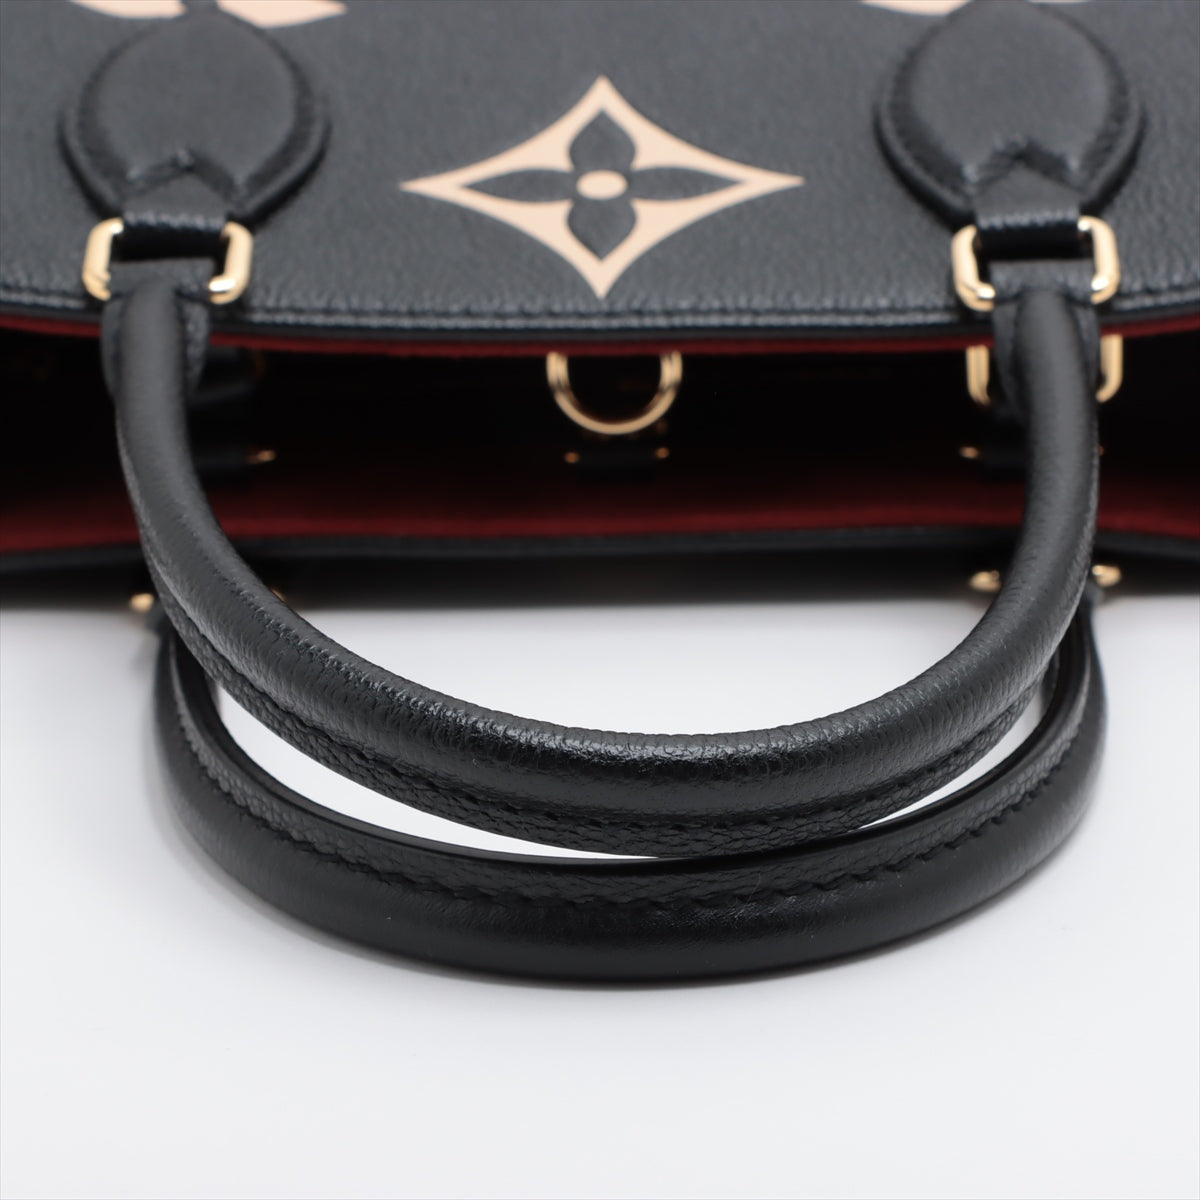 Louis Vuitton monogram empreinte On the Go MM M45495 There was an RFID response